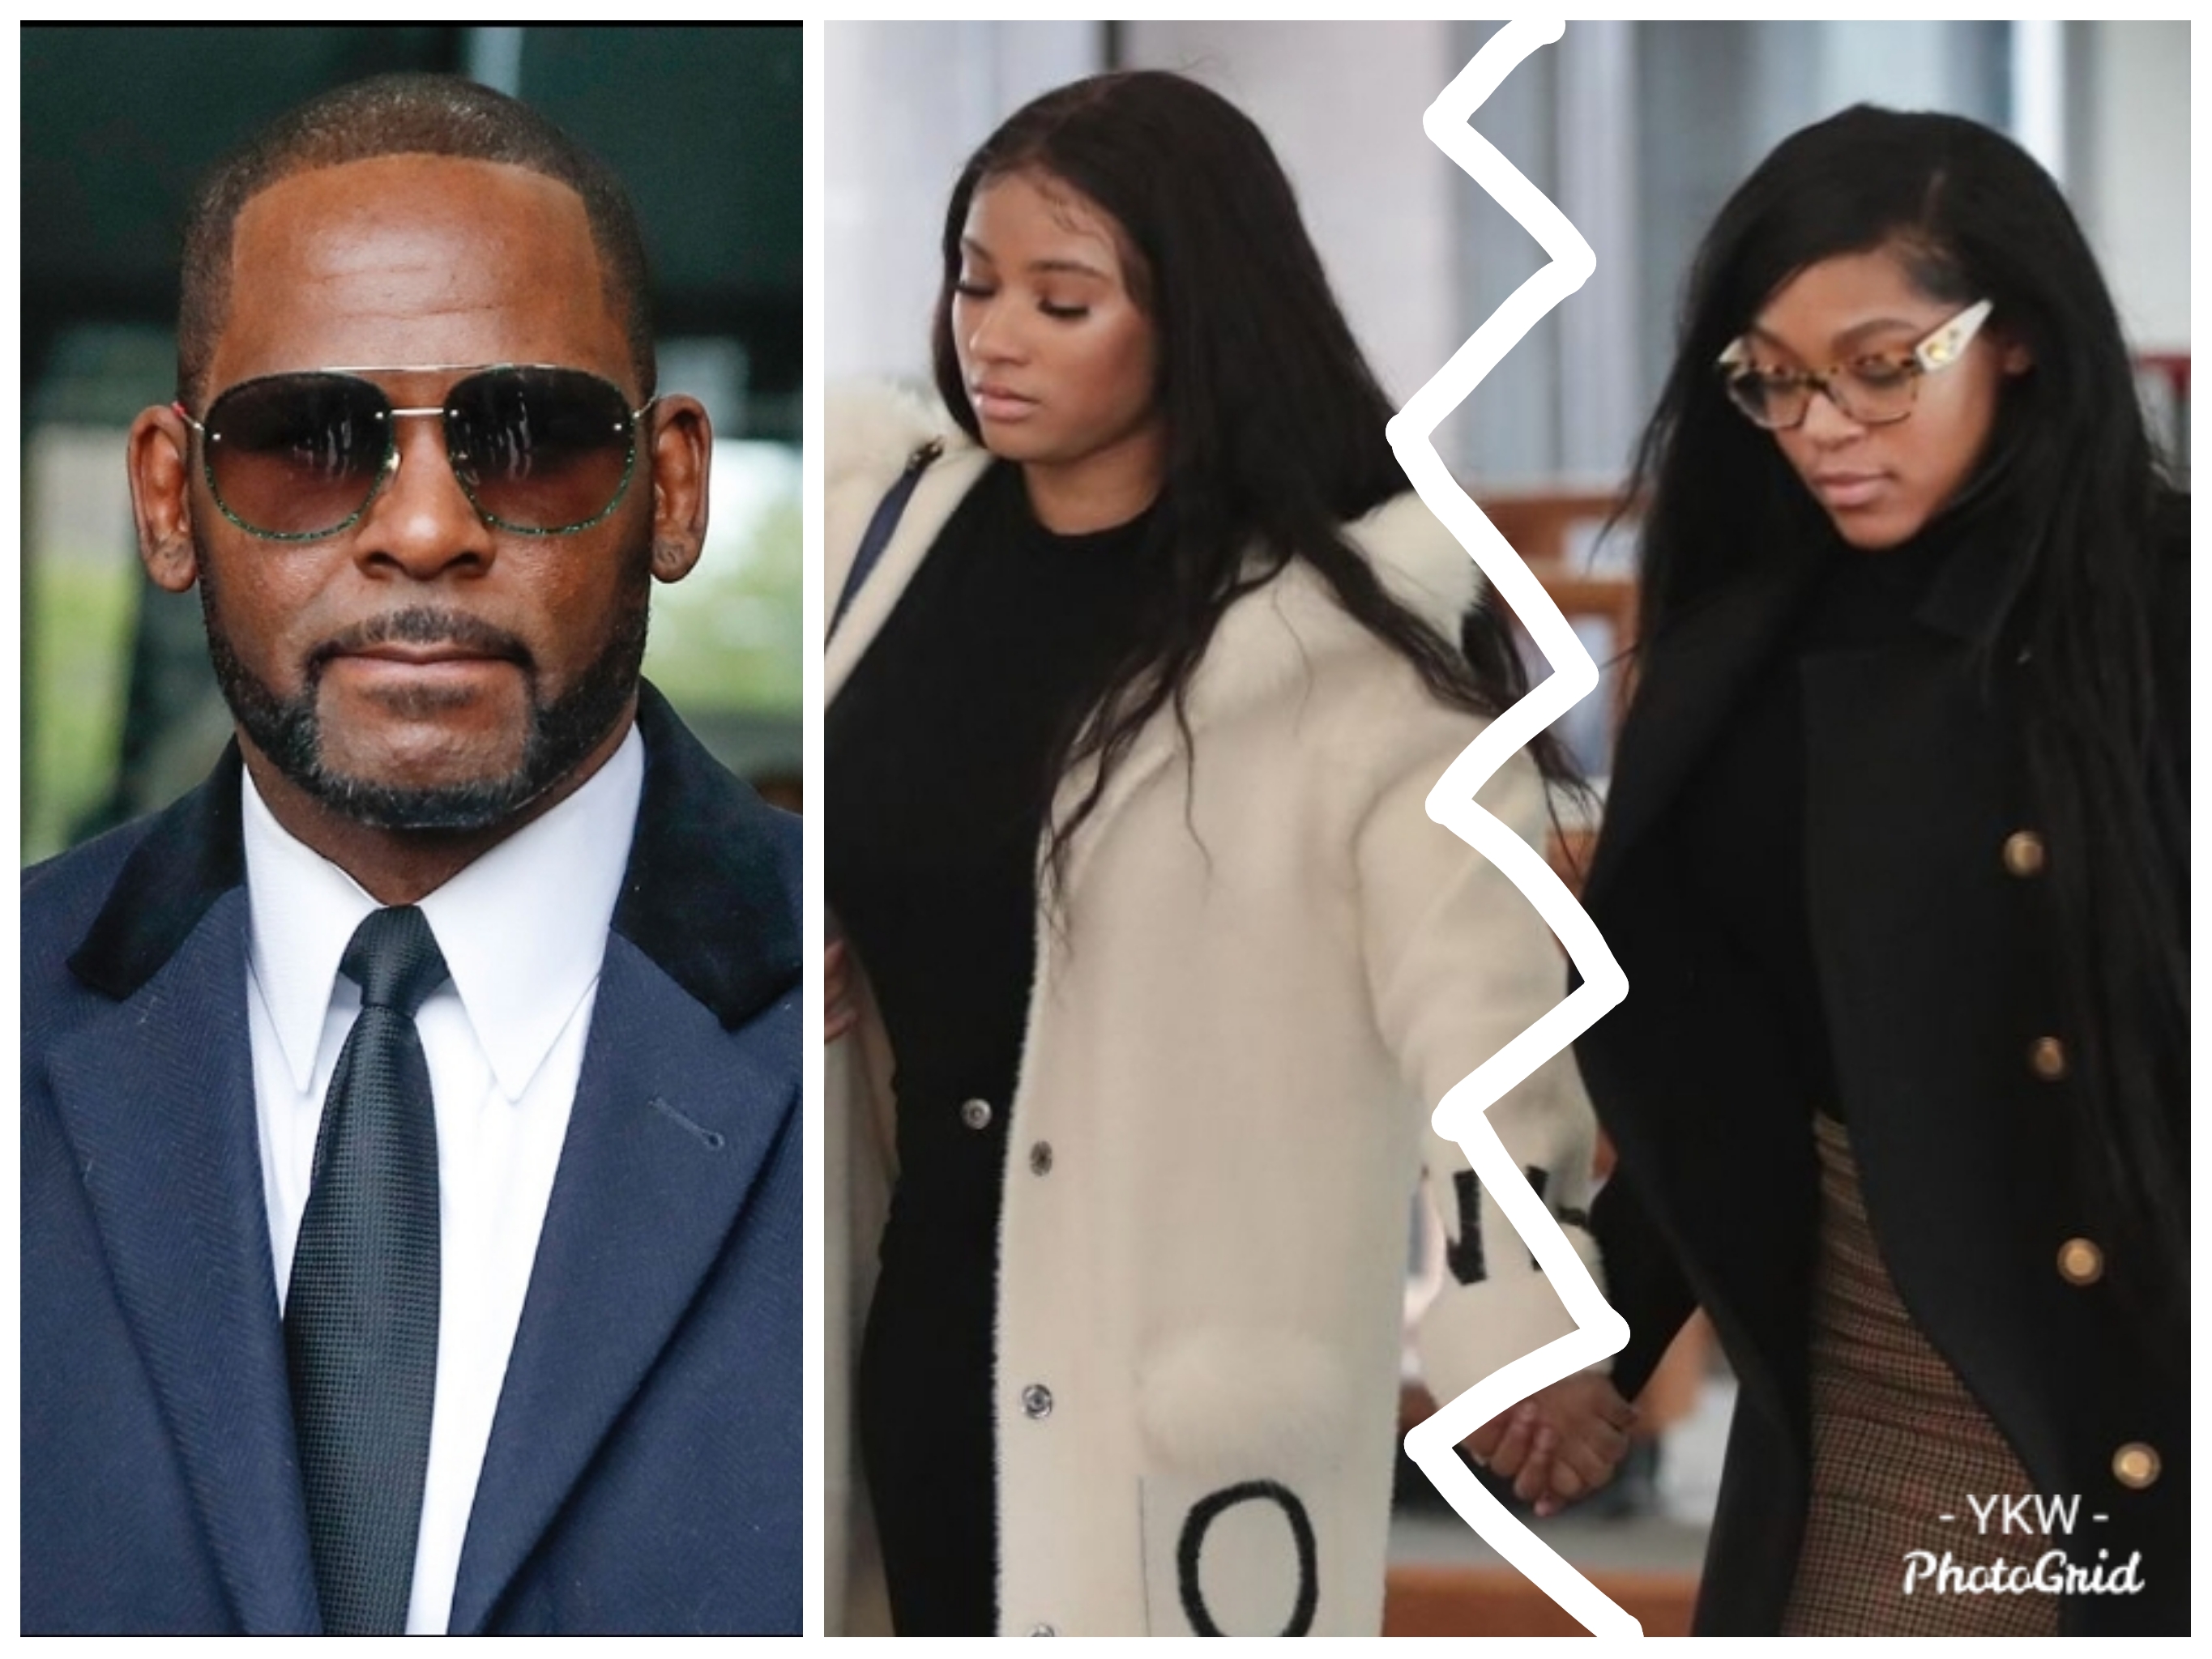 R. Kelly’s Girlfriends Azriel Clary And Joycelyn Savage Get Into Physical Fight On His Birthday